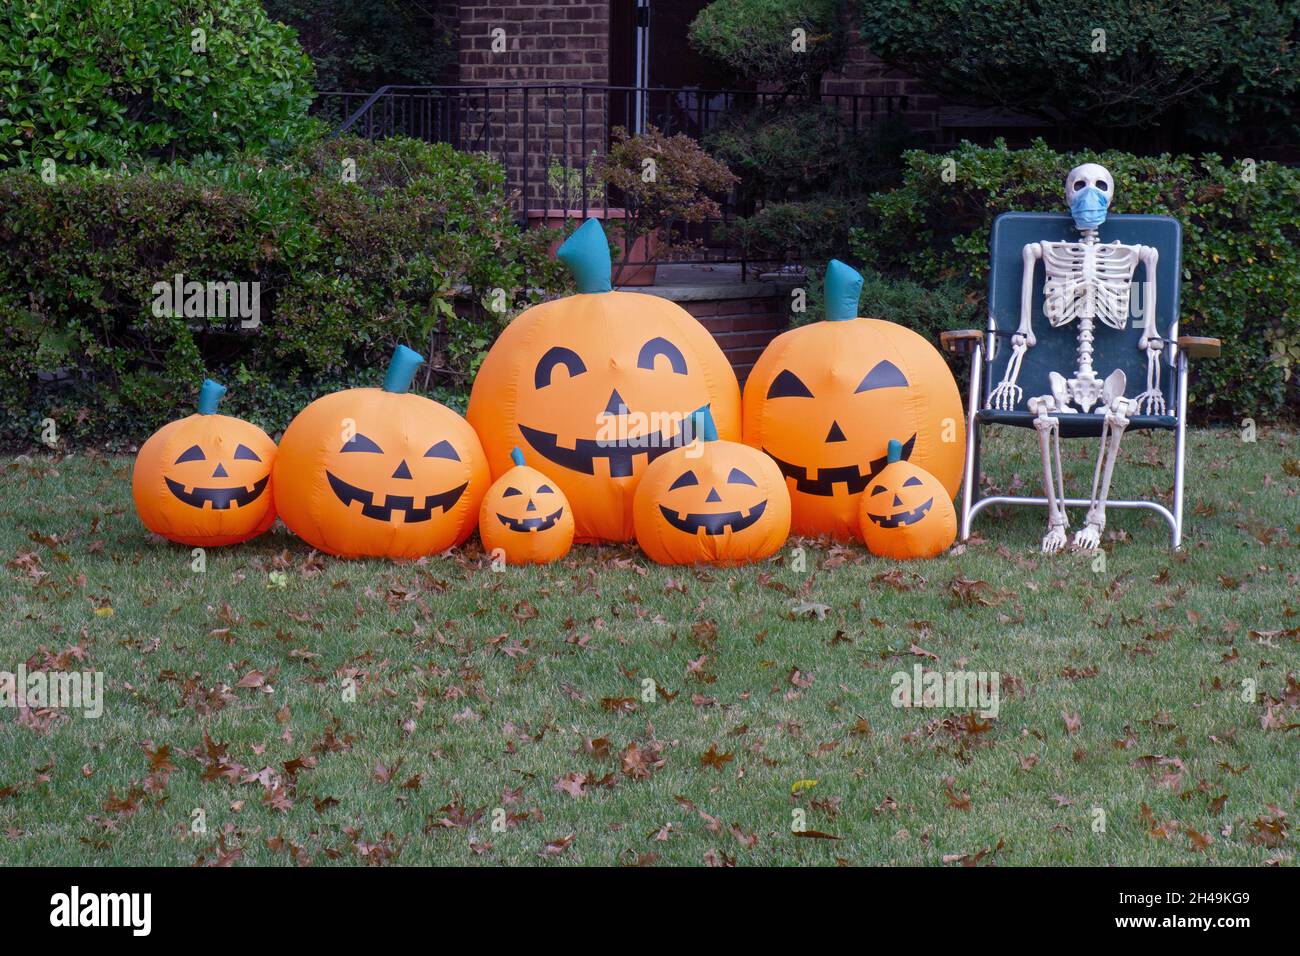 Smiling pumpkins and a mask wearing skeleton decorate a front lawn for Halloween. In Queens, New York City. Stock Photo